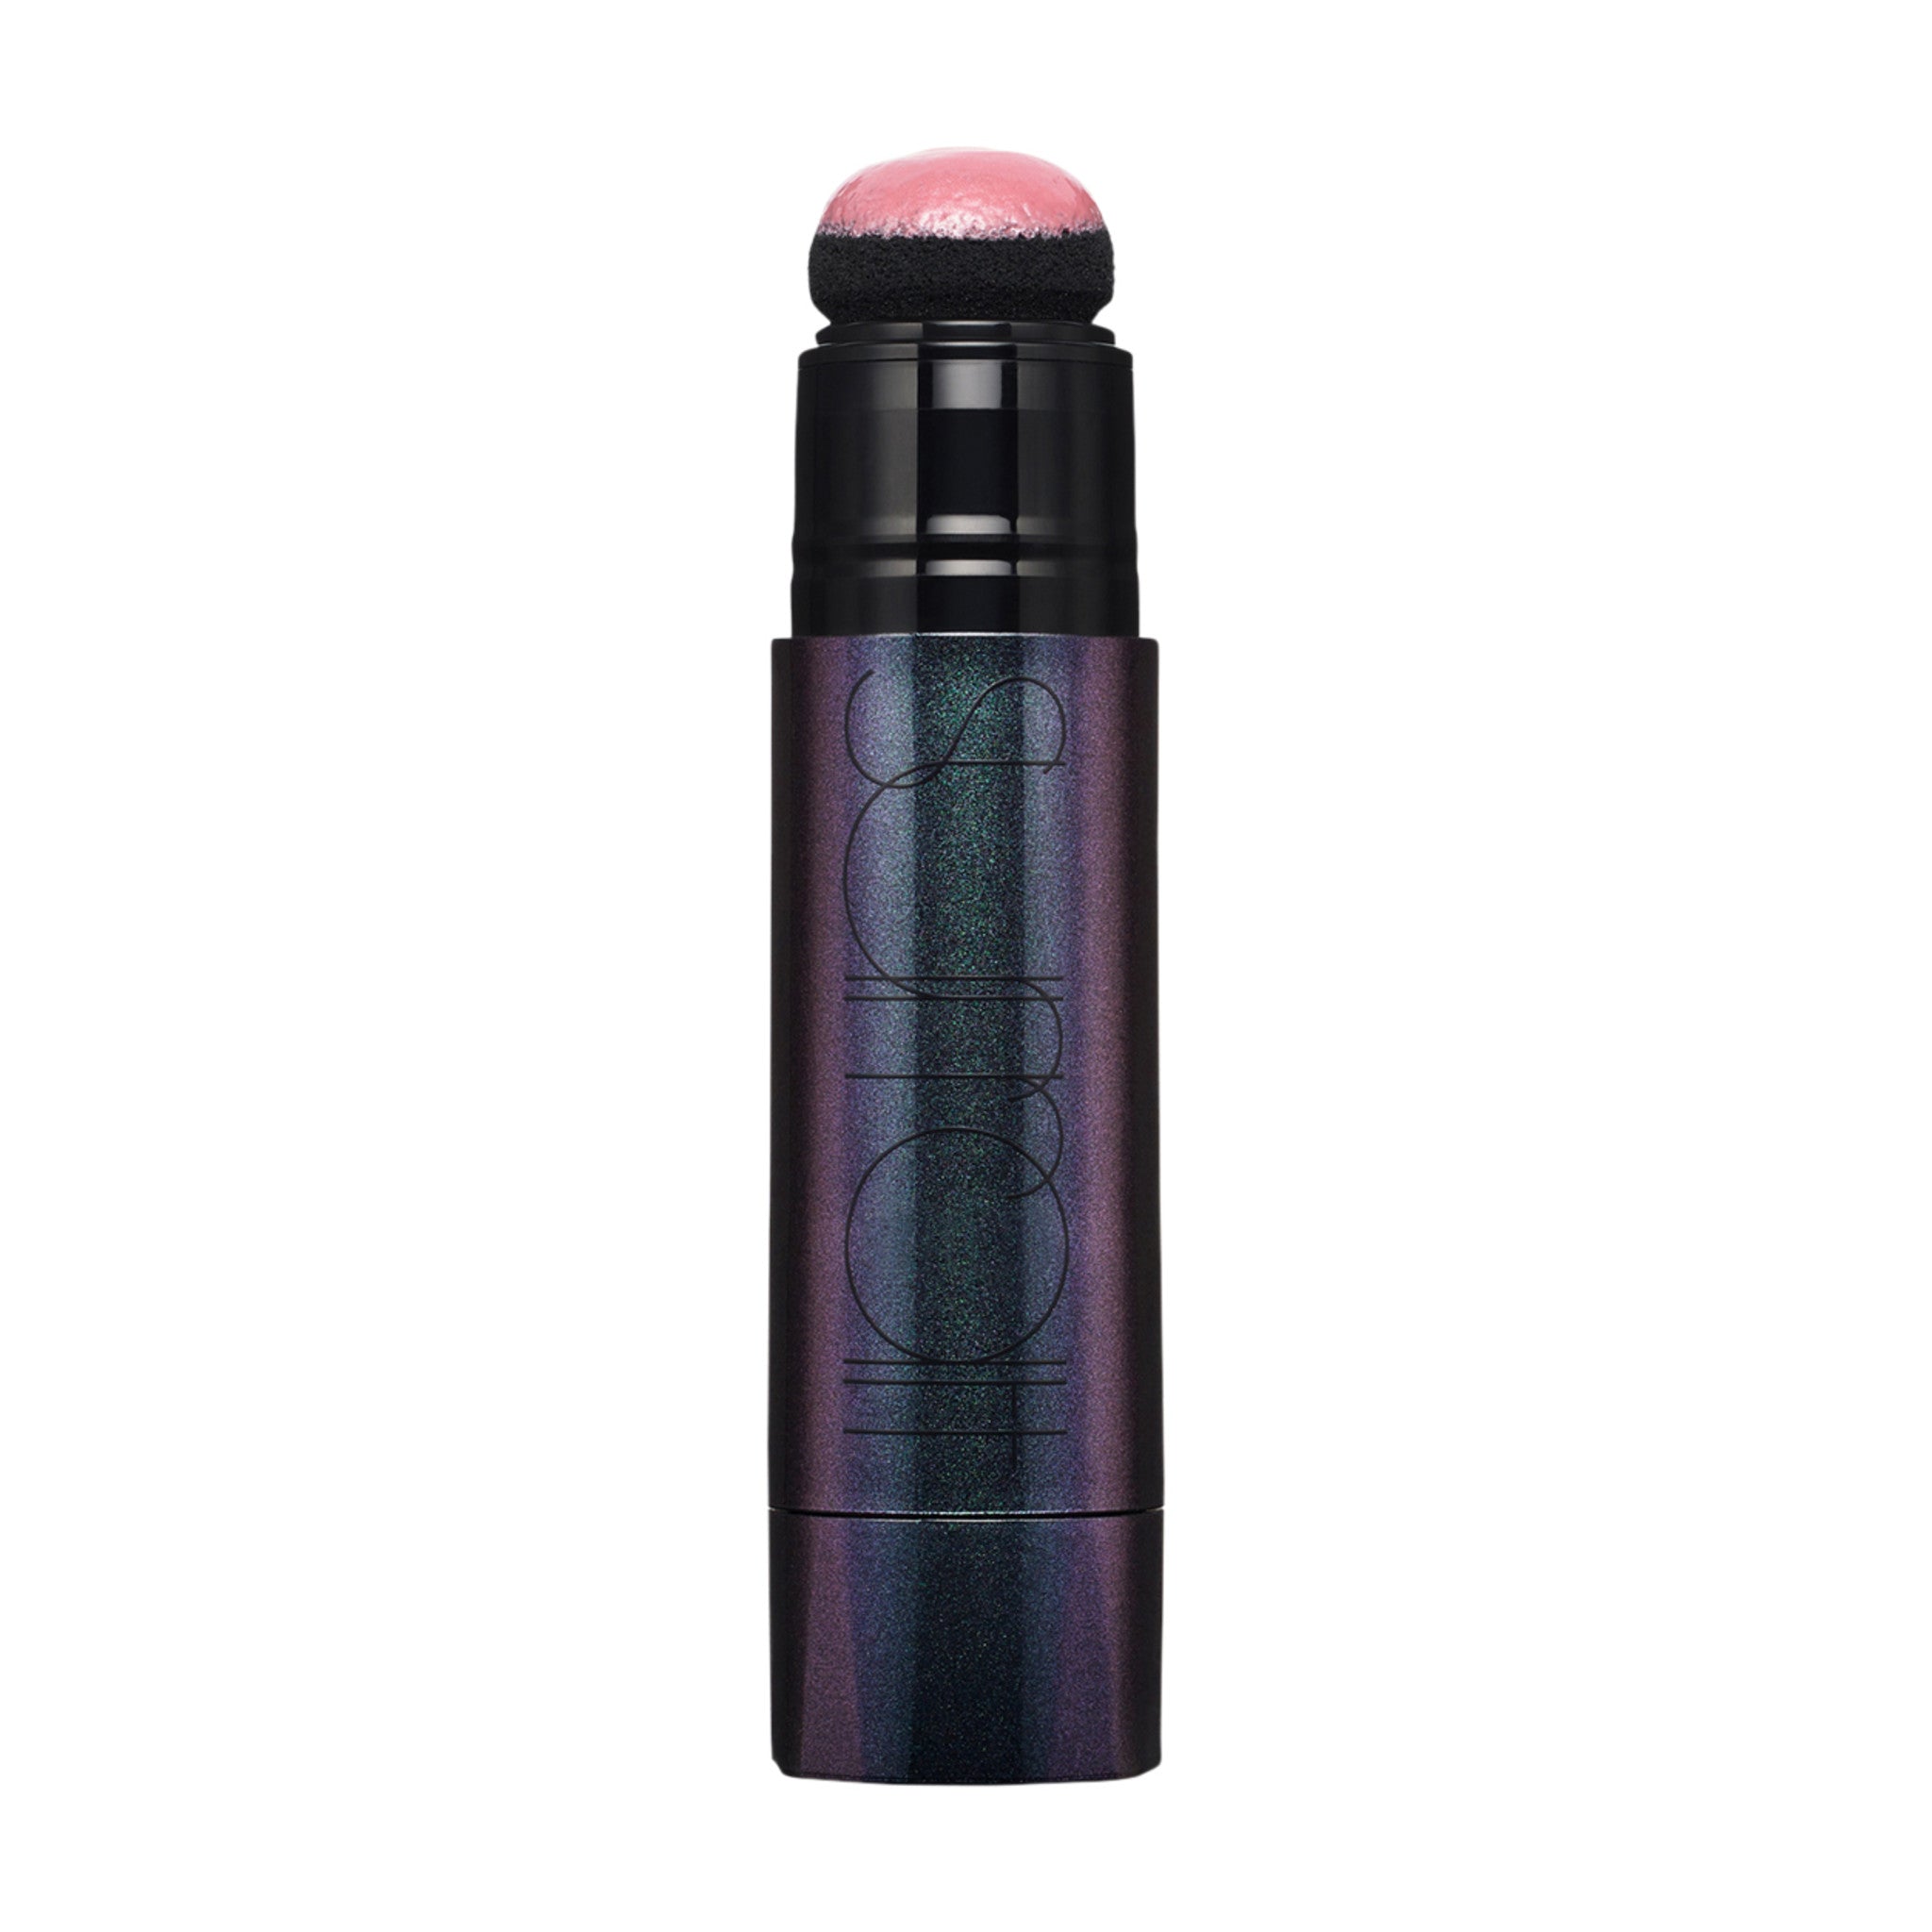 Surratt Artistique Liquid Blush Color/Shade variant: Barbe A Papa main image. This product is in the color pink